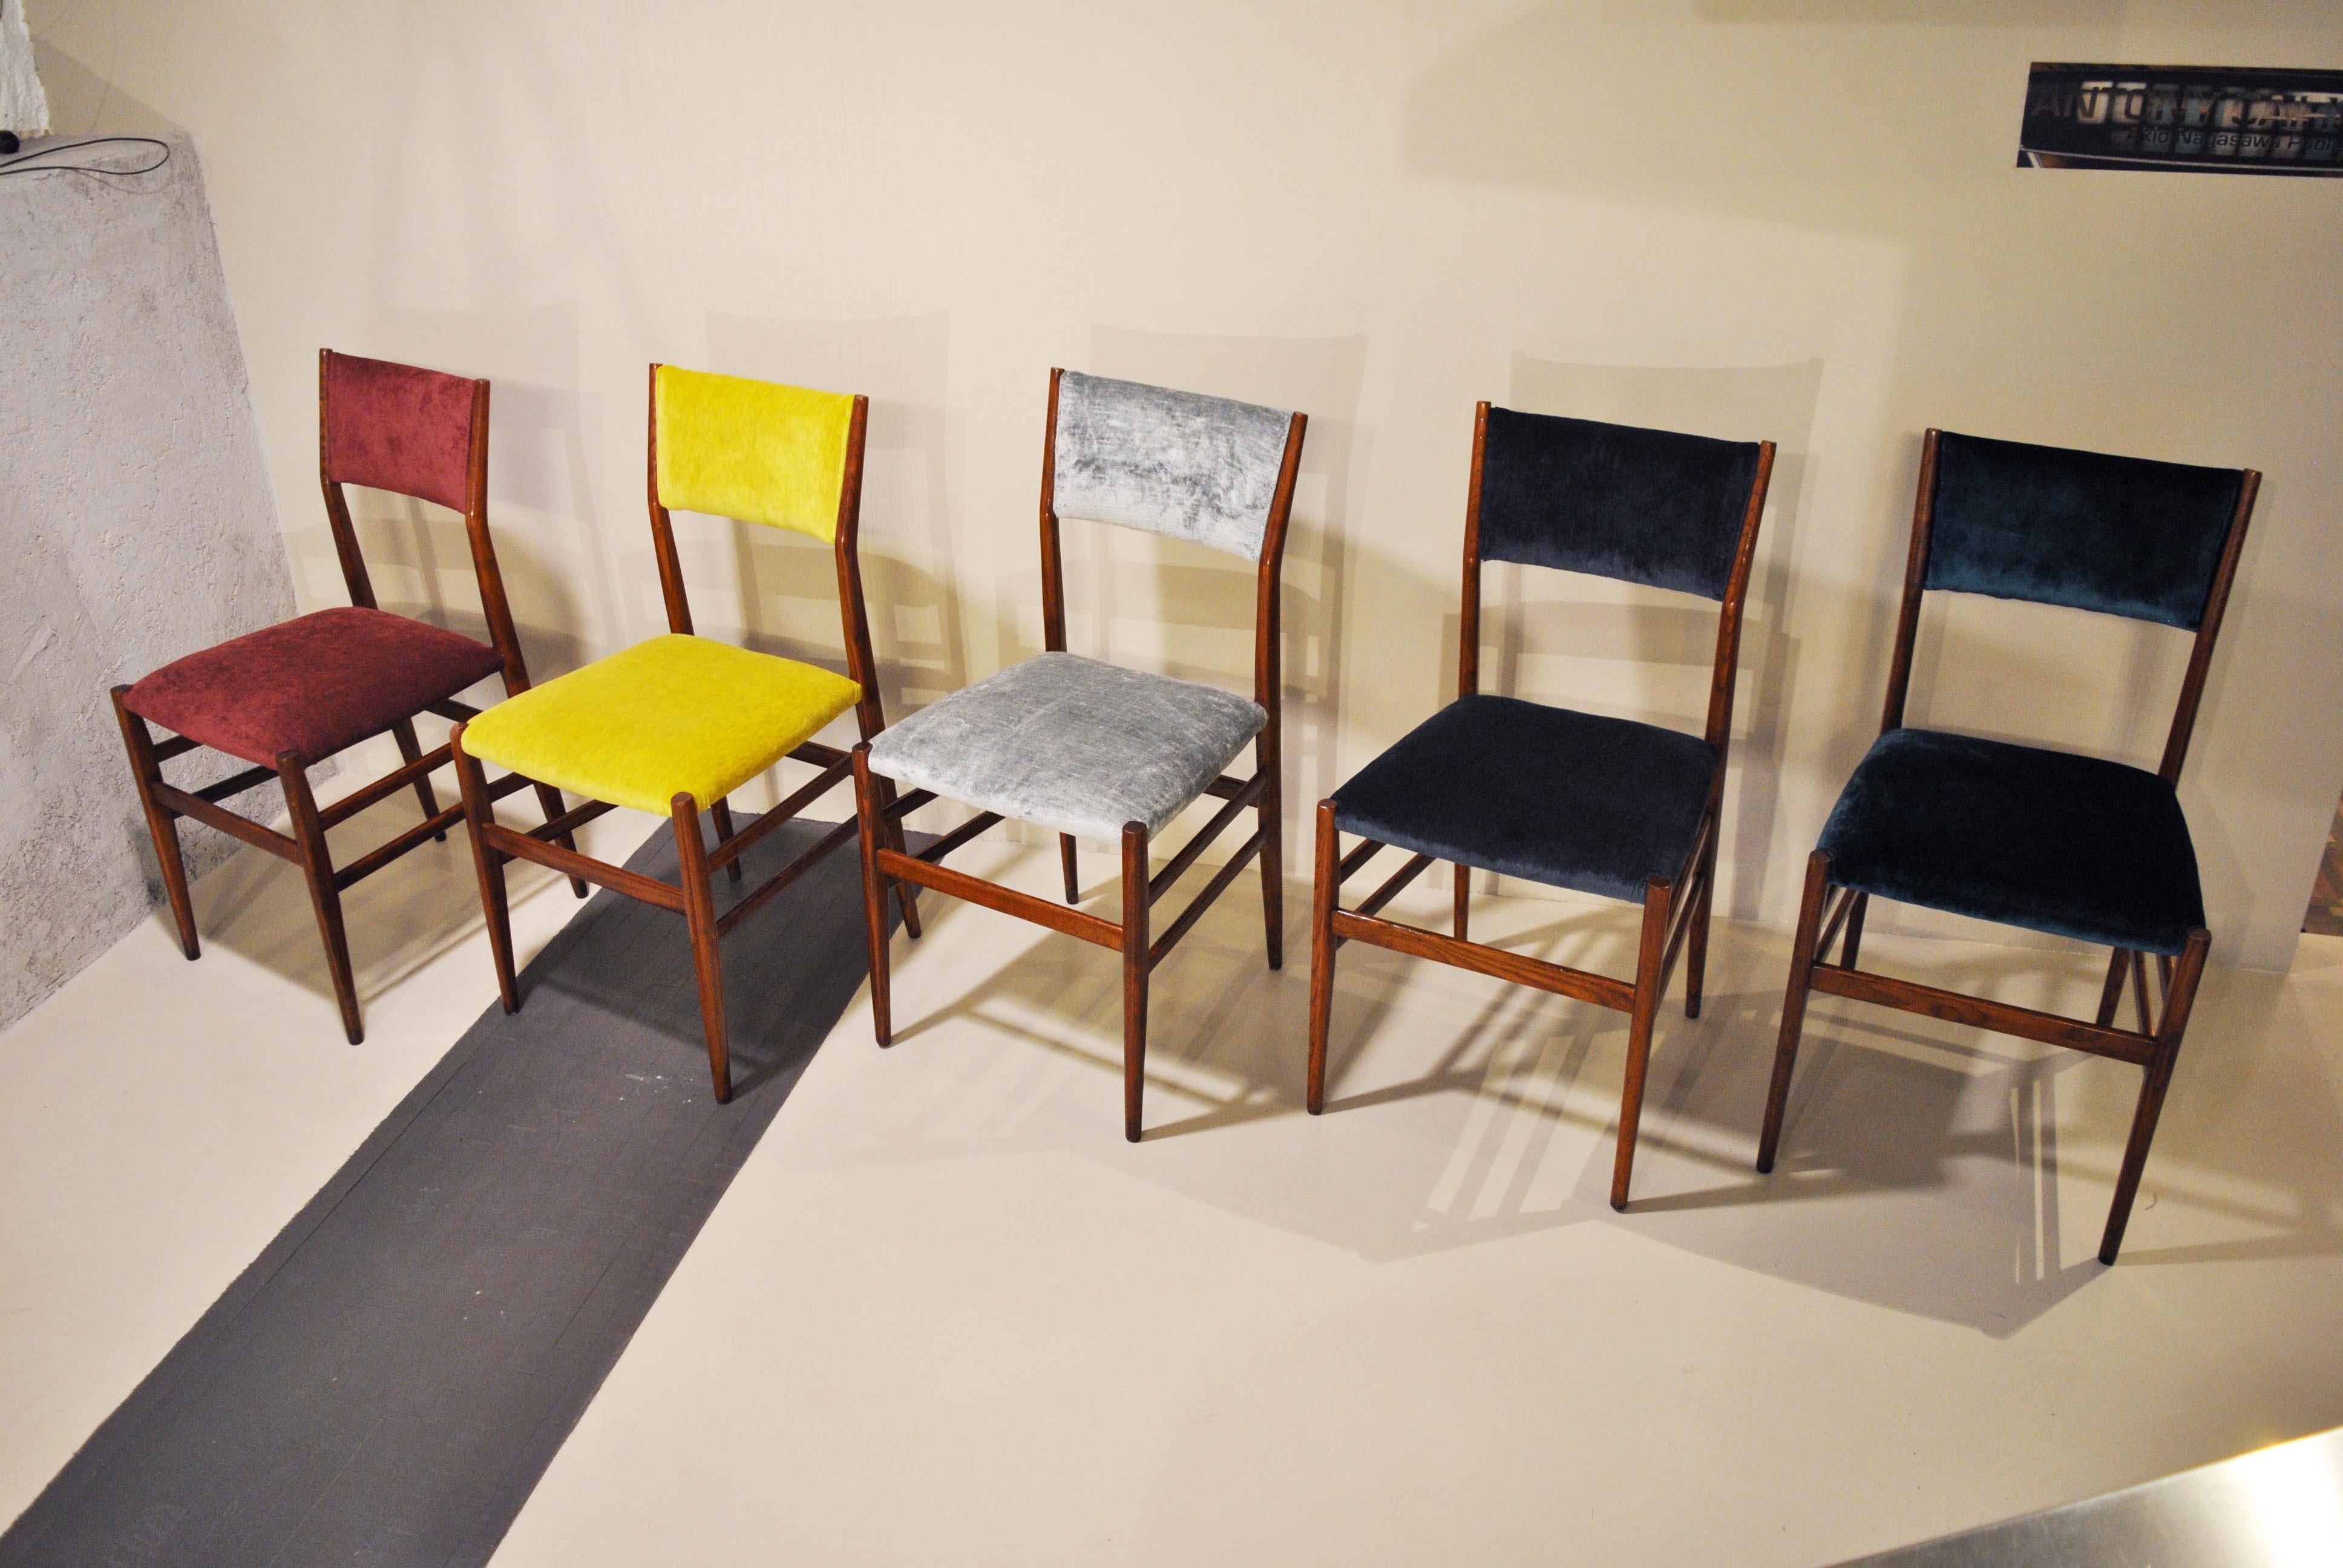 Fabulous set of 14-light model chairs designed by Gio Ponti and produced by Cassina in 1951. This set includes 4 items in blue 4-color light green 2 in burgundy color 2 gray 2 two in petroleum green. All lined up in an elegant velvet.